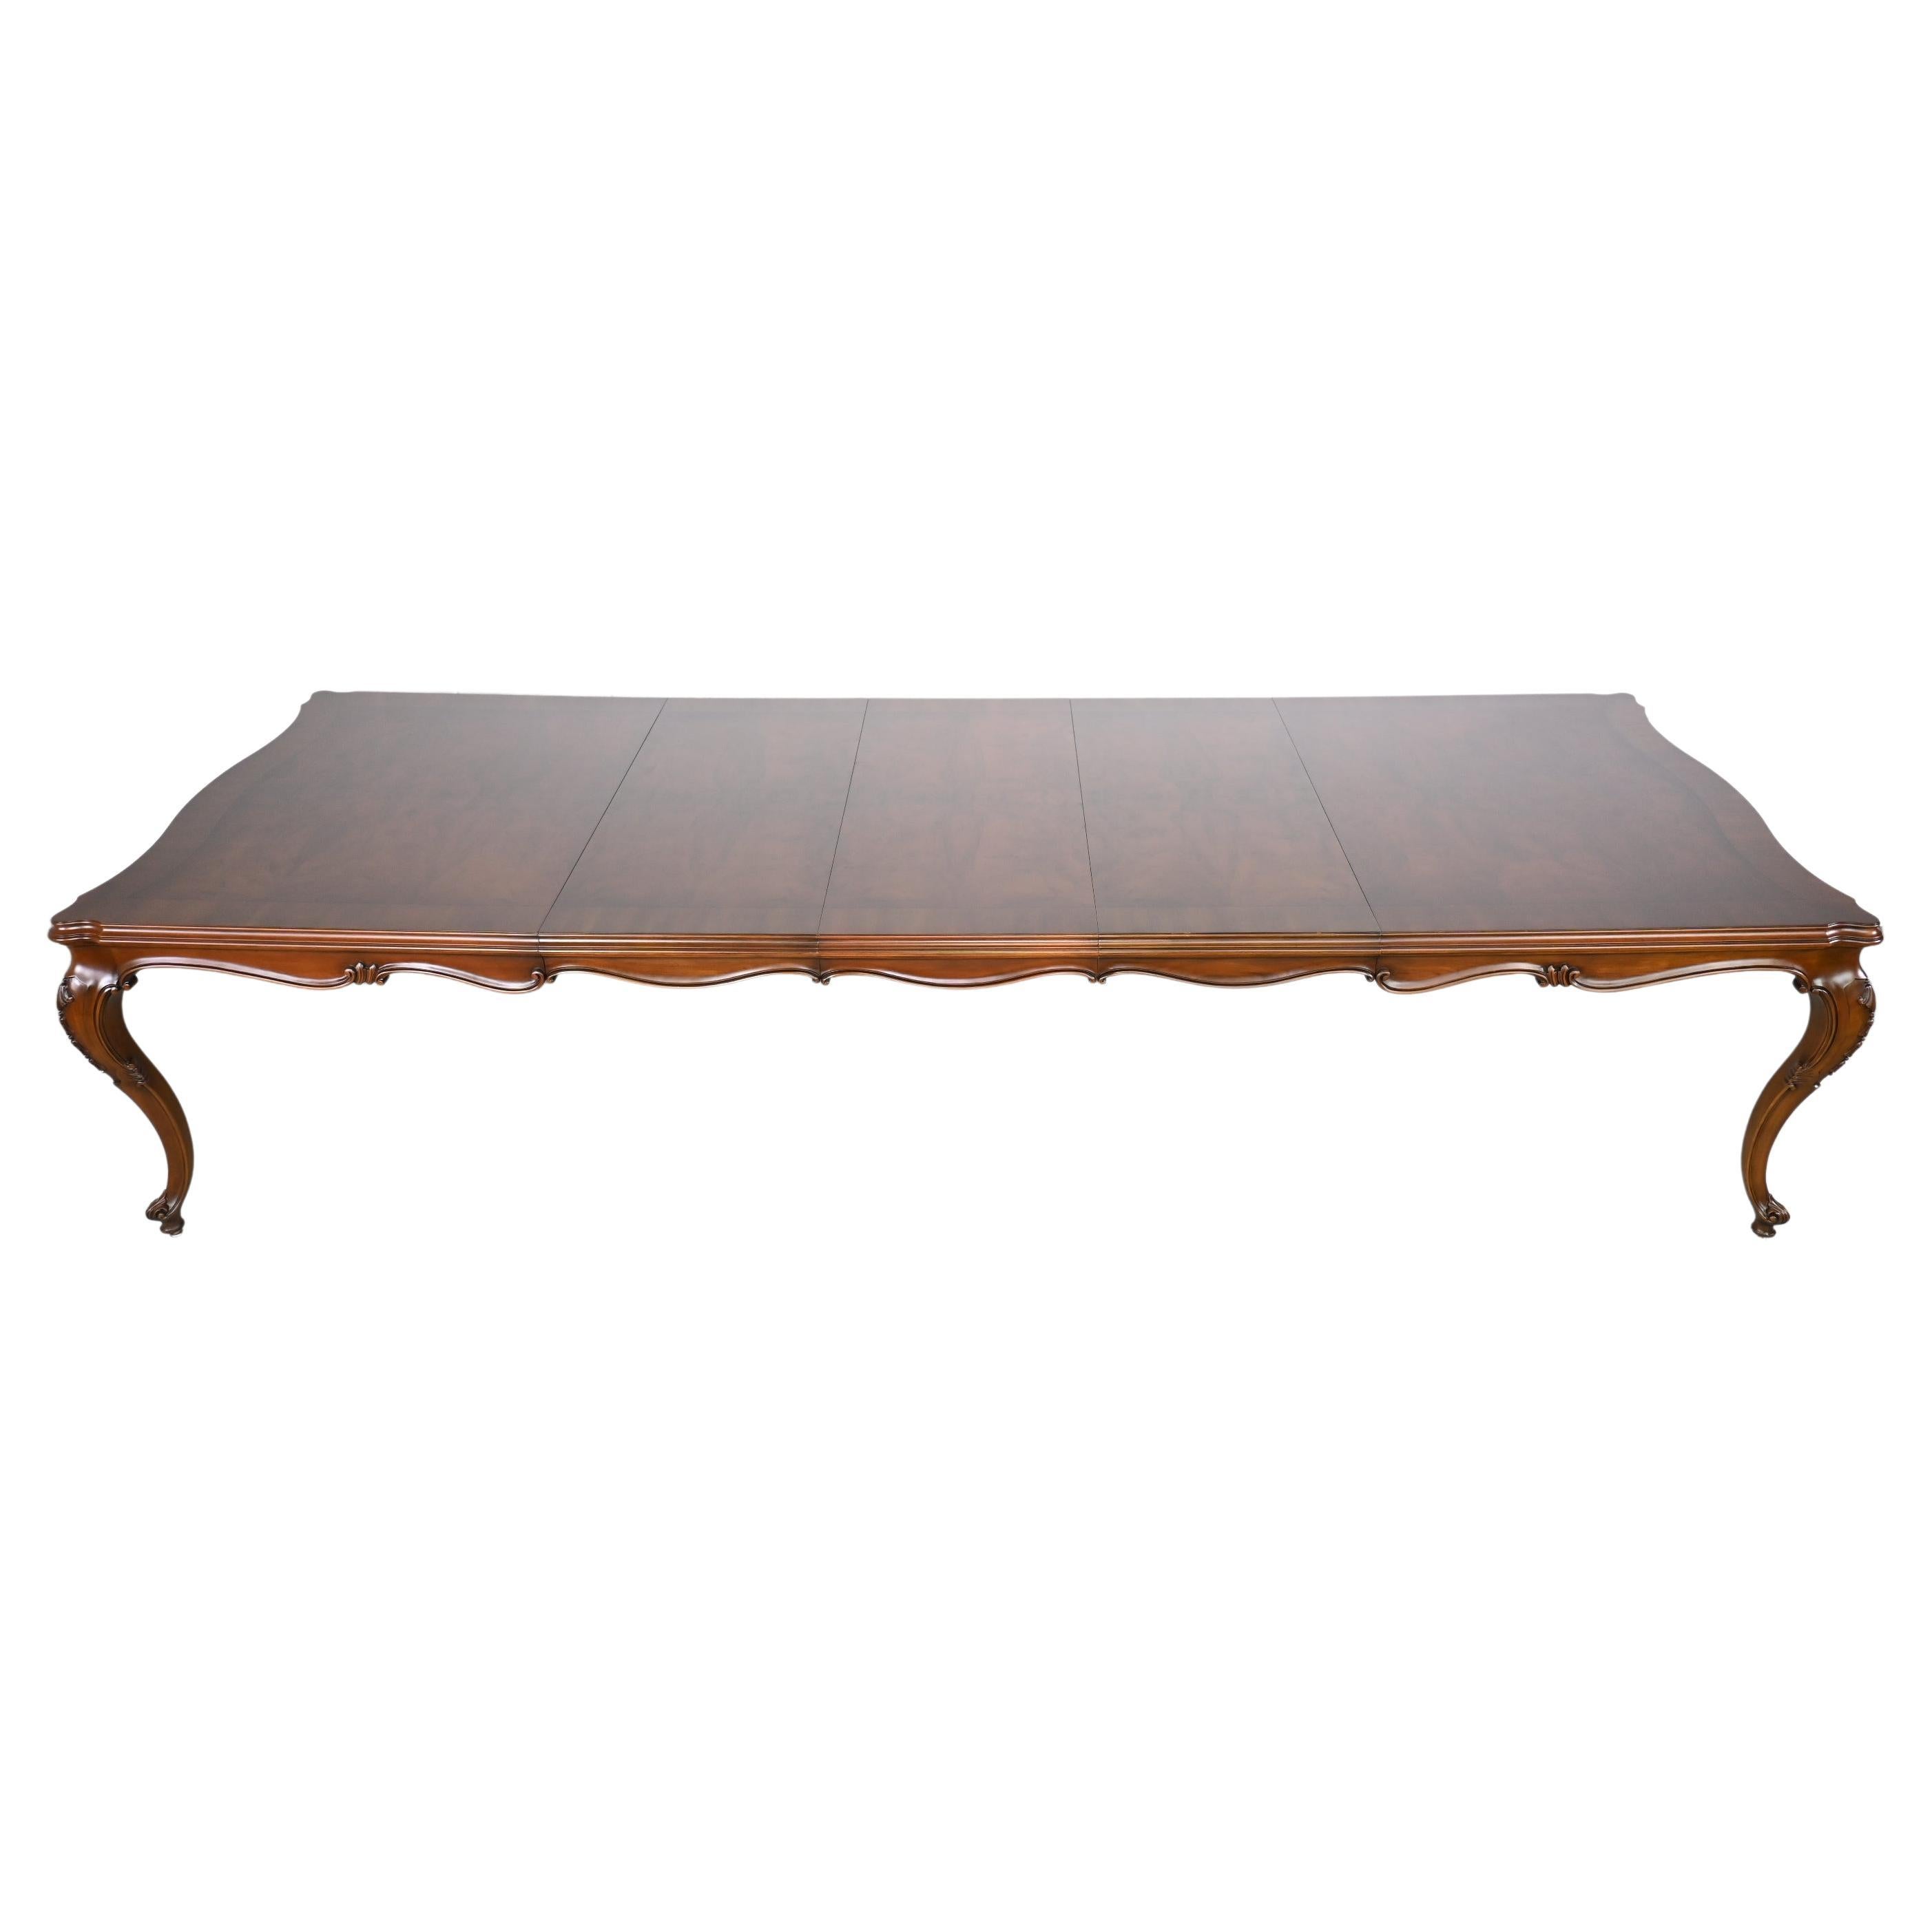 Karges Furniture Louis XV Style French Provincial Extension Dining Table